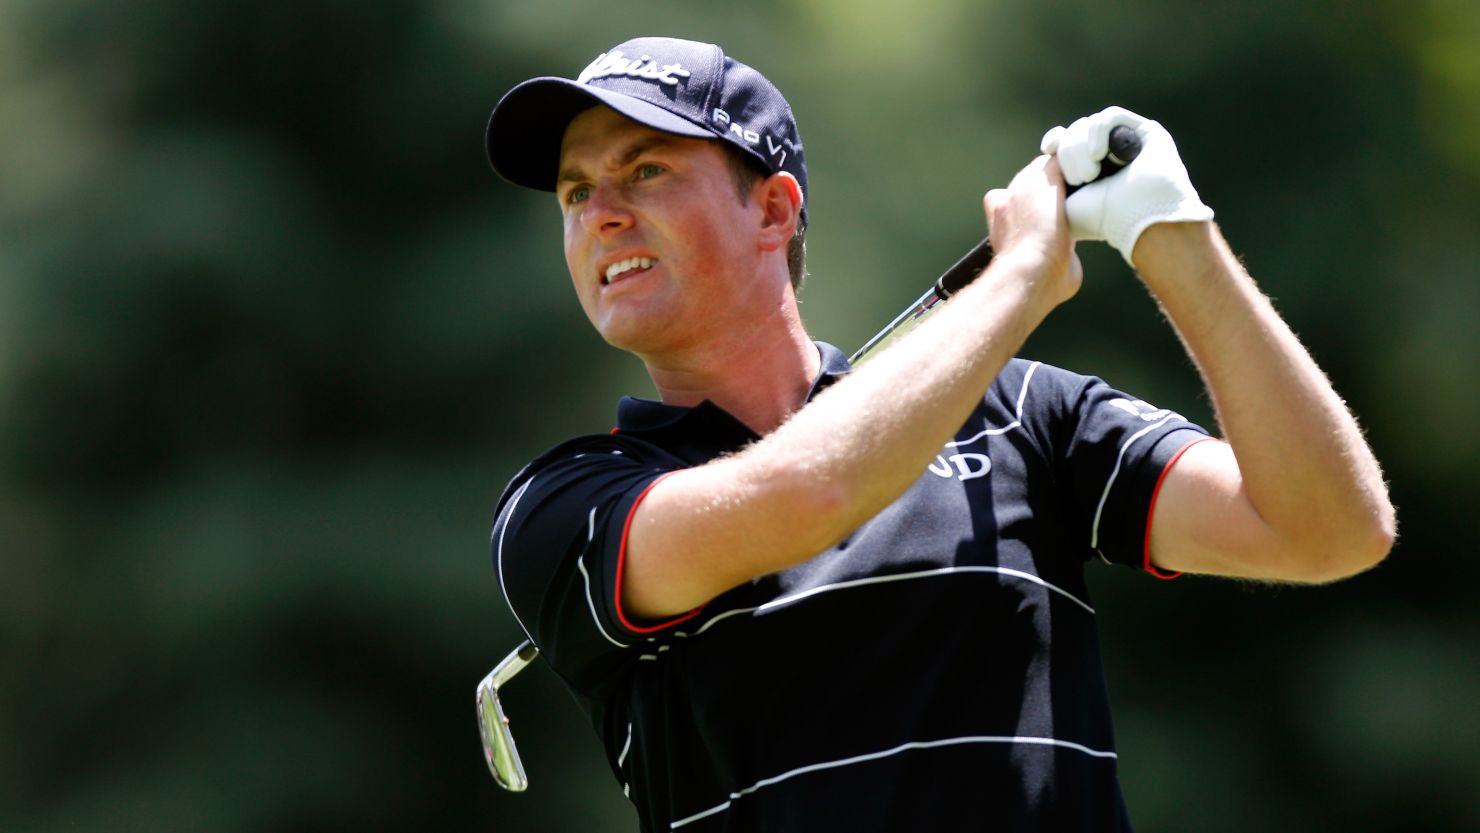 Webb Simpson shot a first round 64 on the opening day of the Bridgestone Invitational at Firestone Country Club.